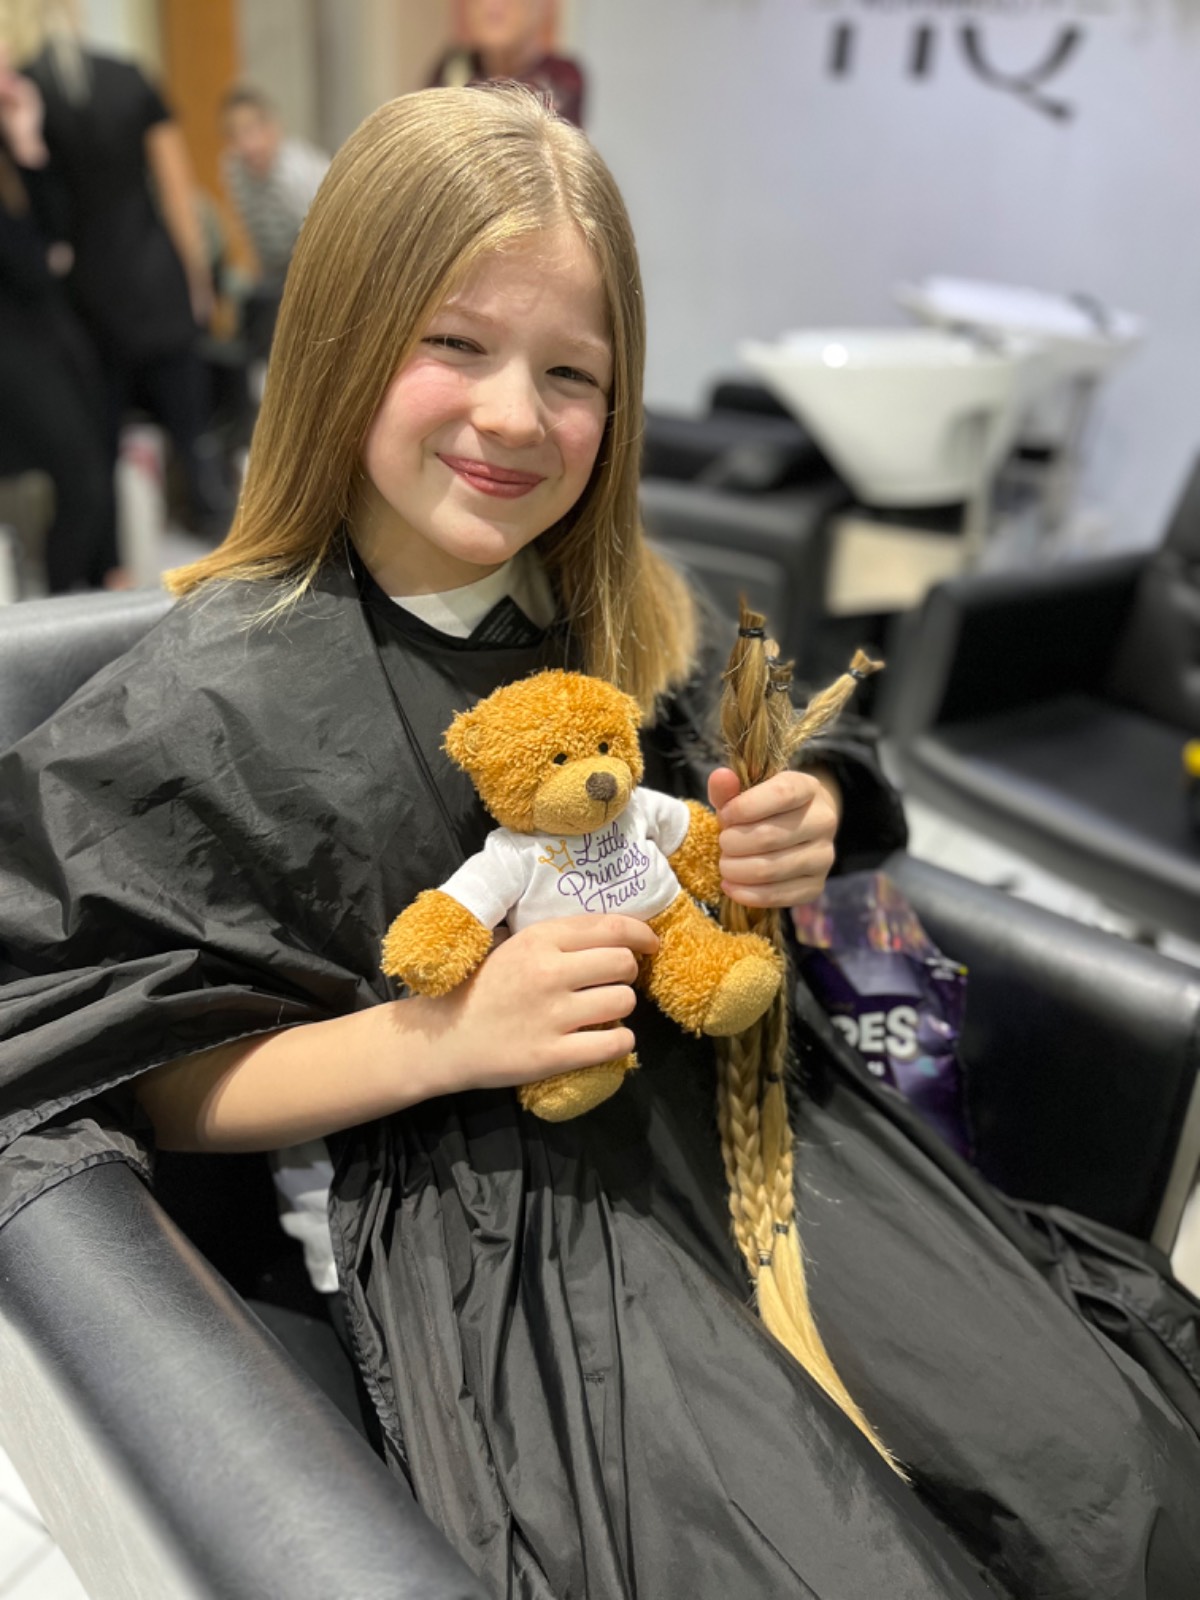 Millie donates 20 inches and raised over £1200